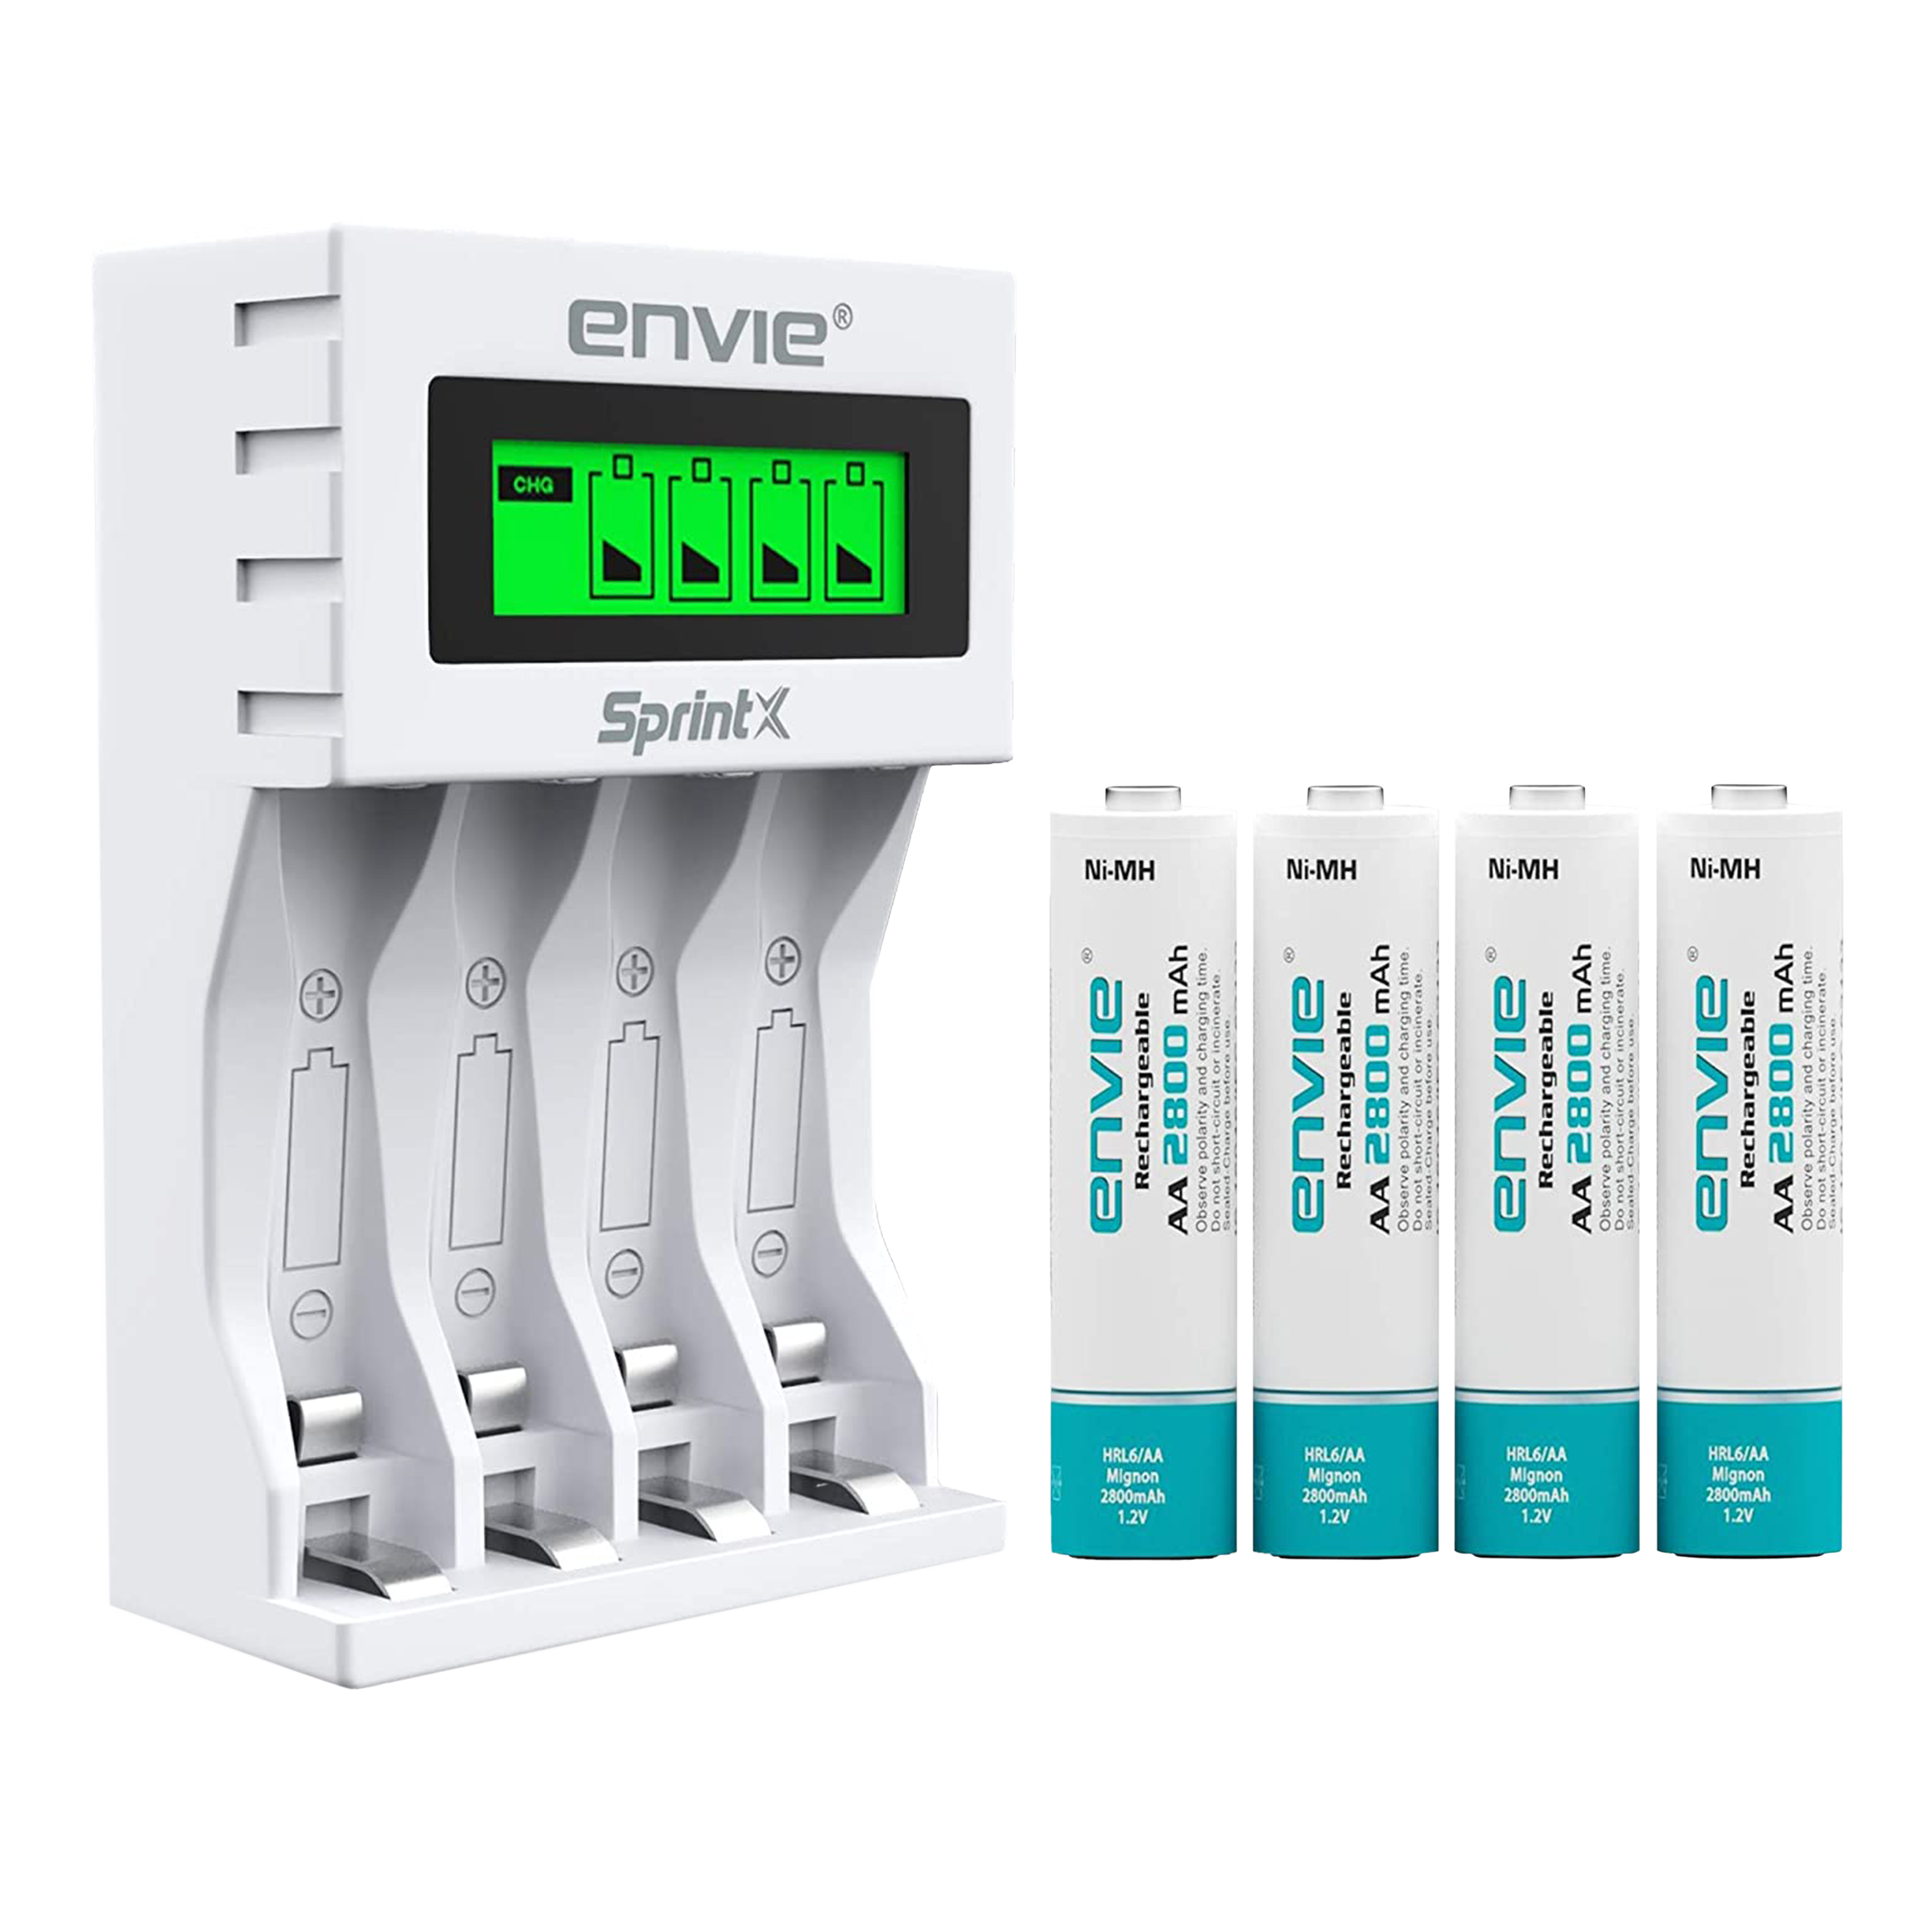 envie SprintX ECR11 MC Fast Camera Battery Charger Combo for 28004PL (4-Ports, LCD Display)